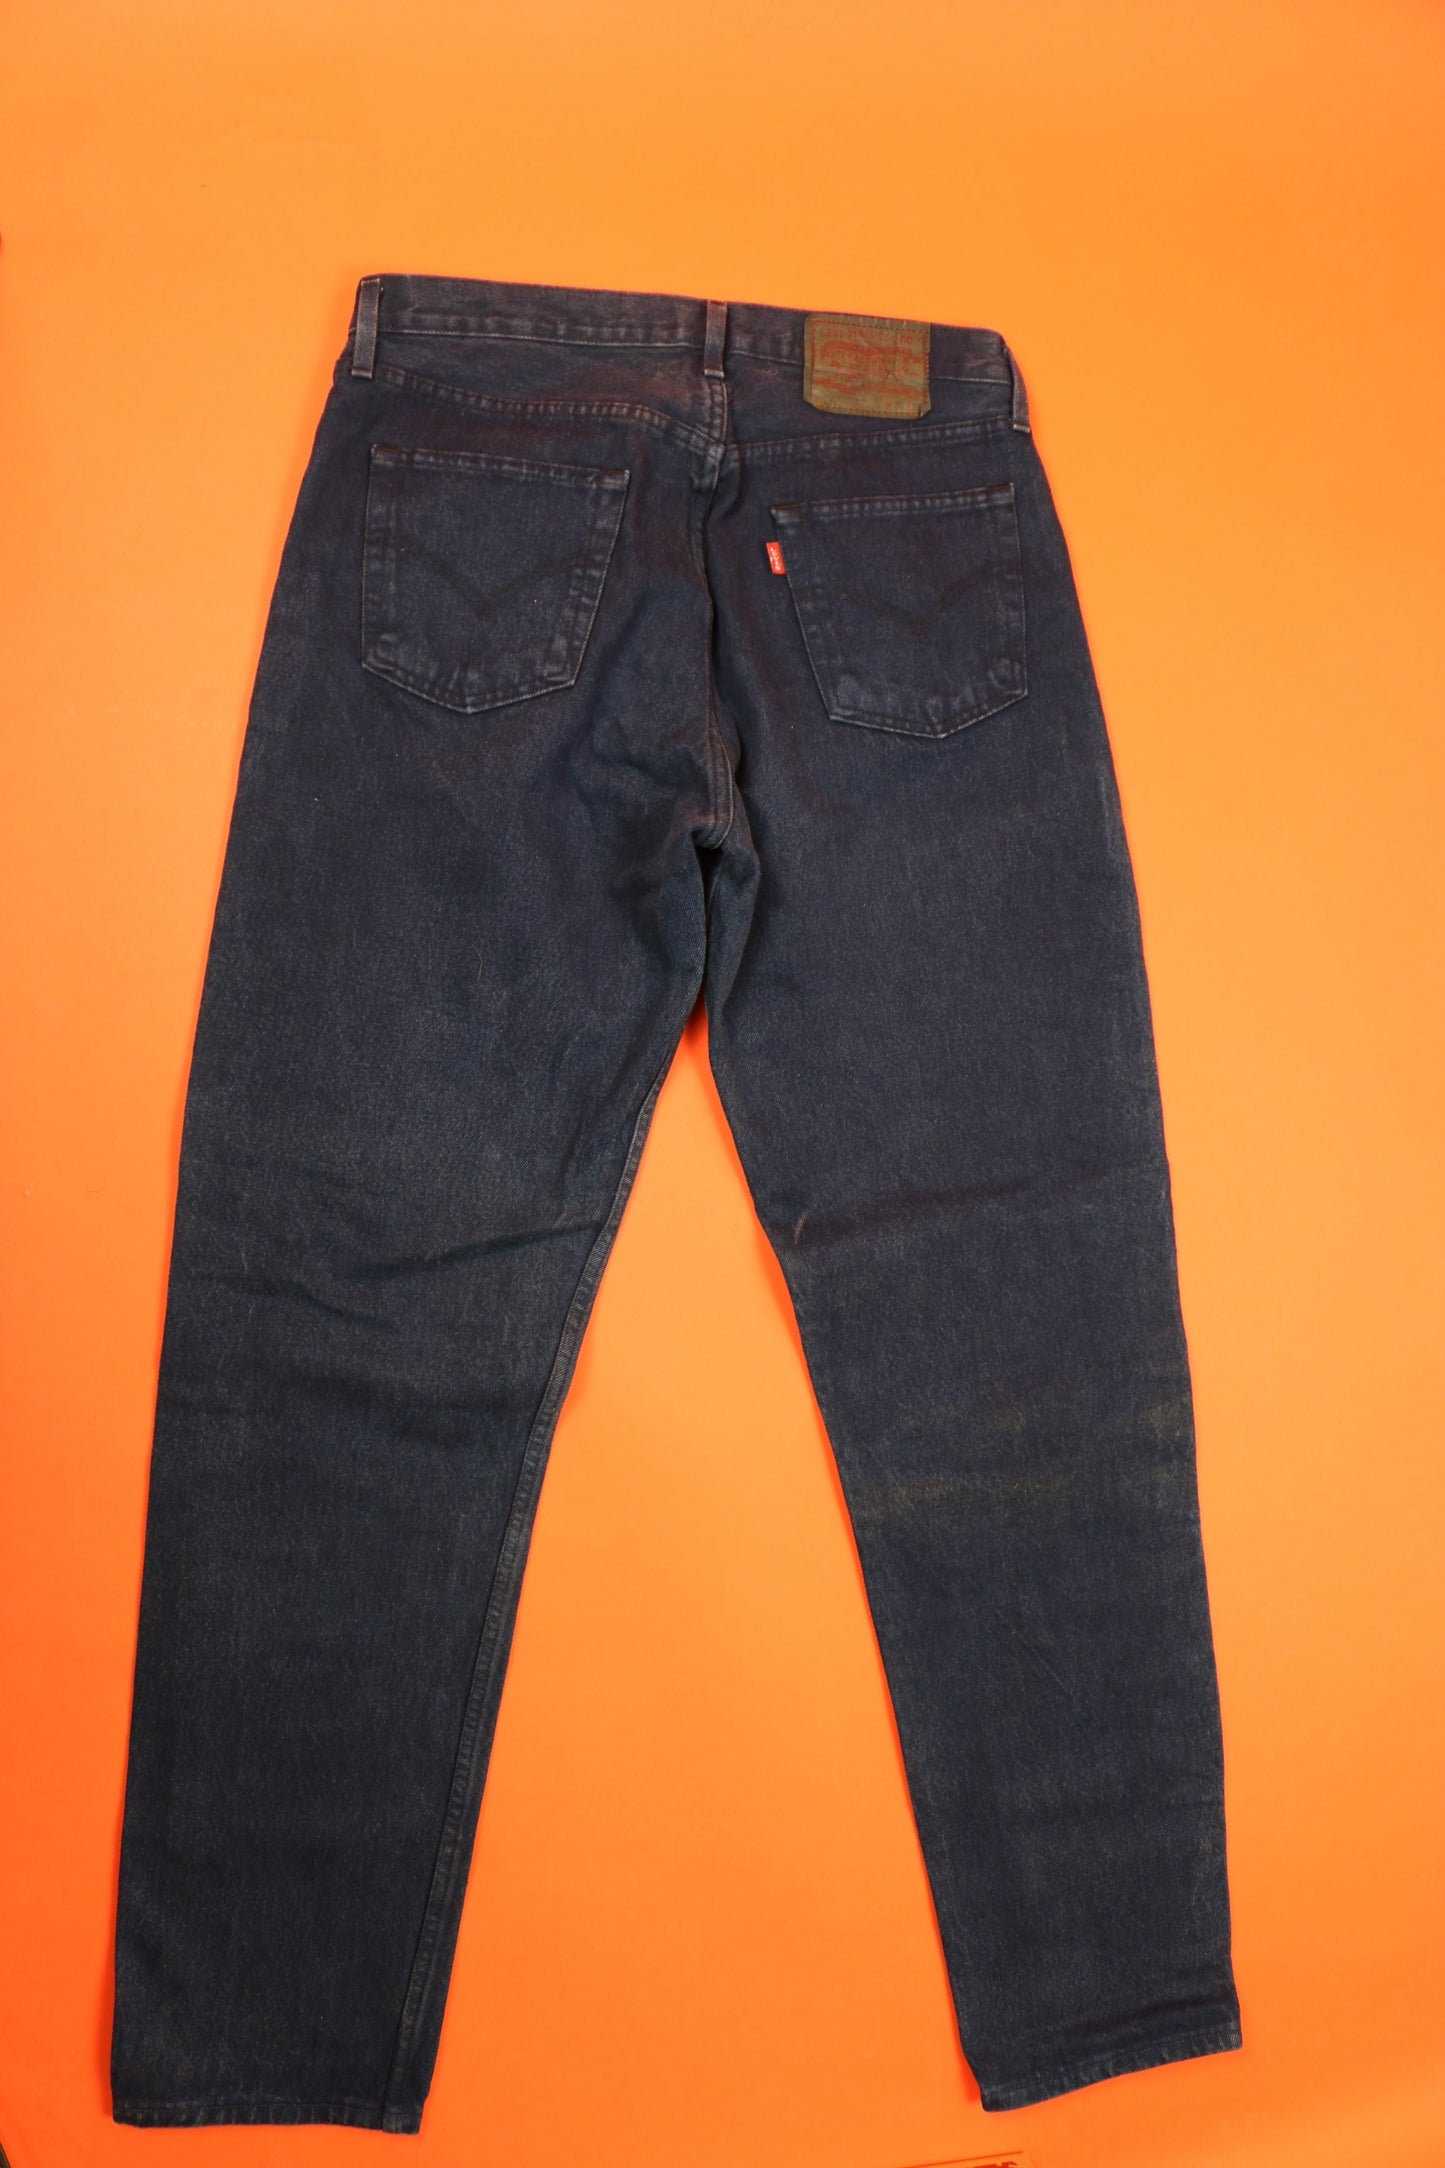 Levi's 501 Jeans Made in U.S.A. 'W38 L36' - vintage clothing clochard92.com